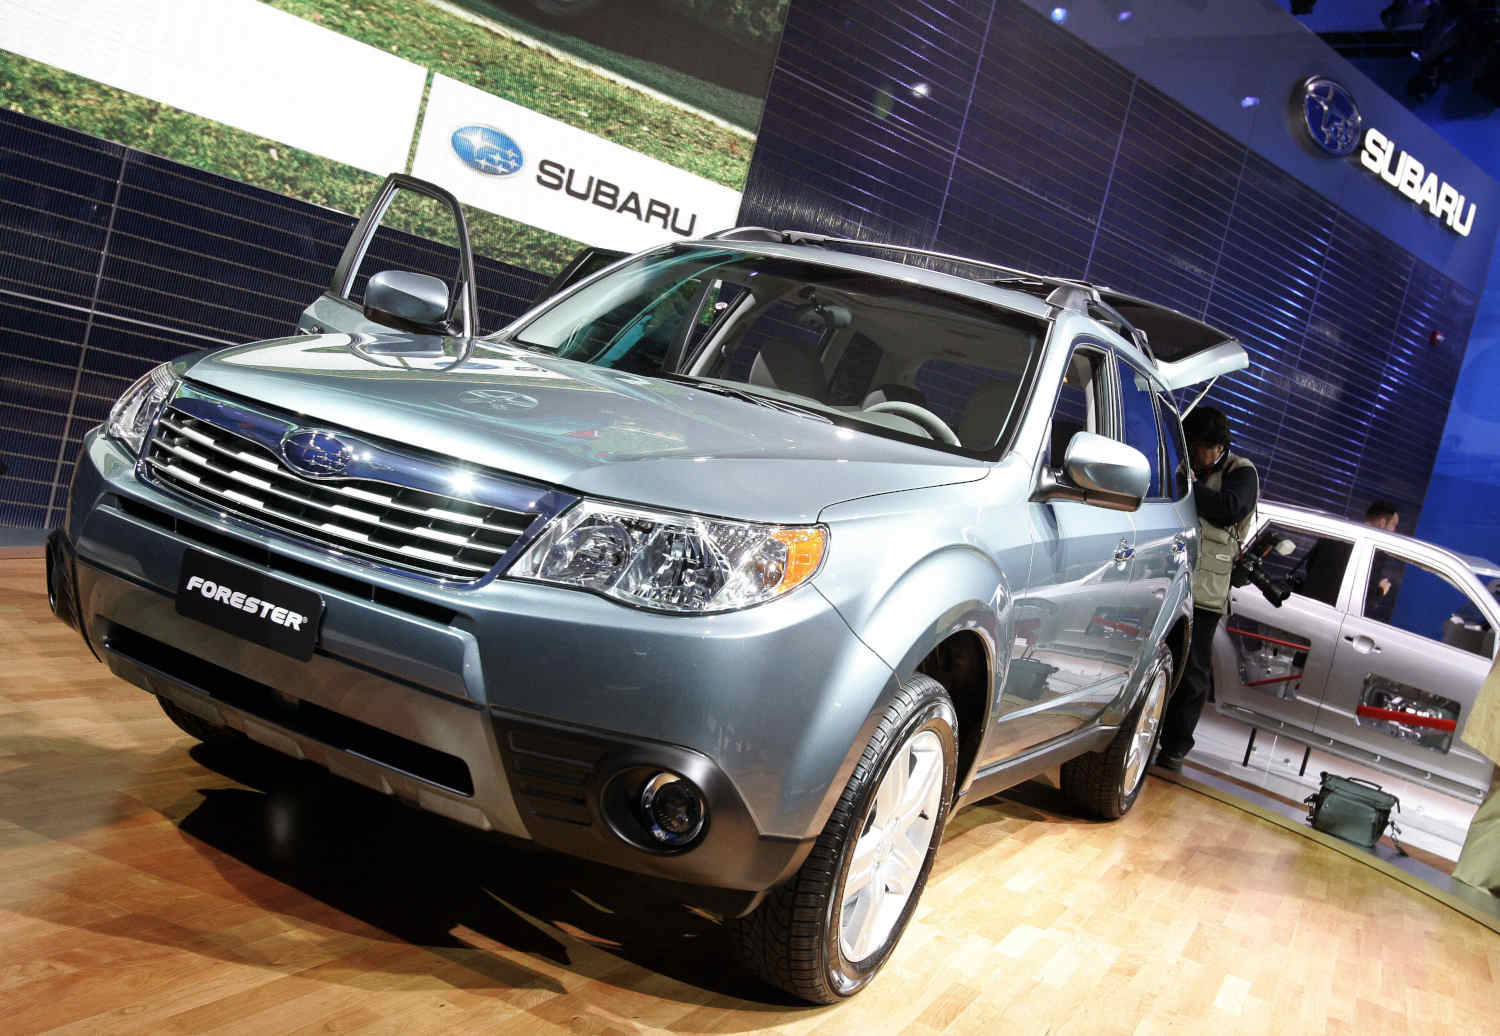 Reliable cheap SUVs for the family include this Subaru Forester